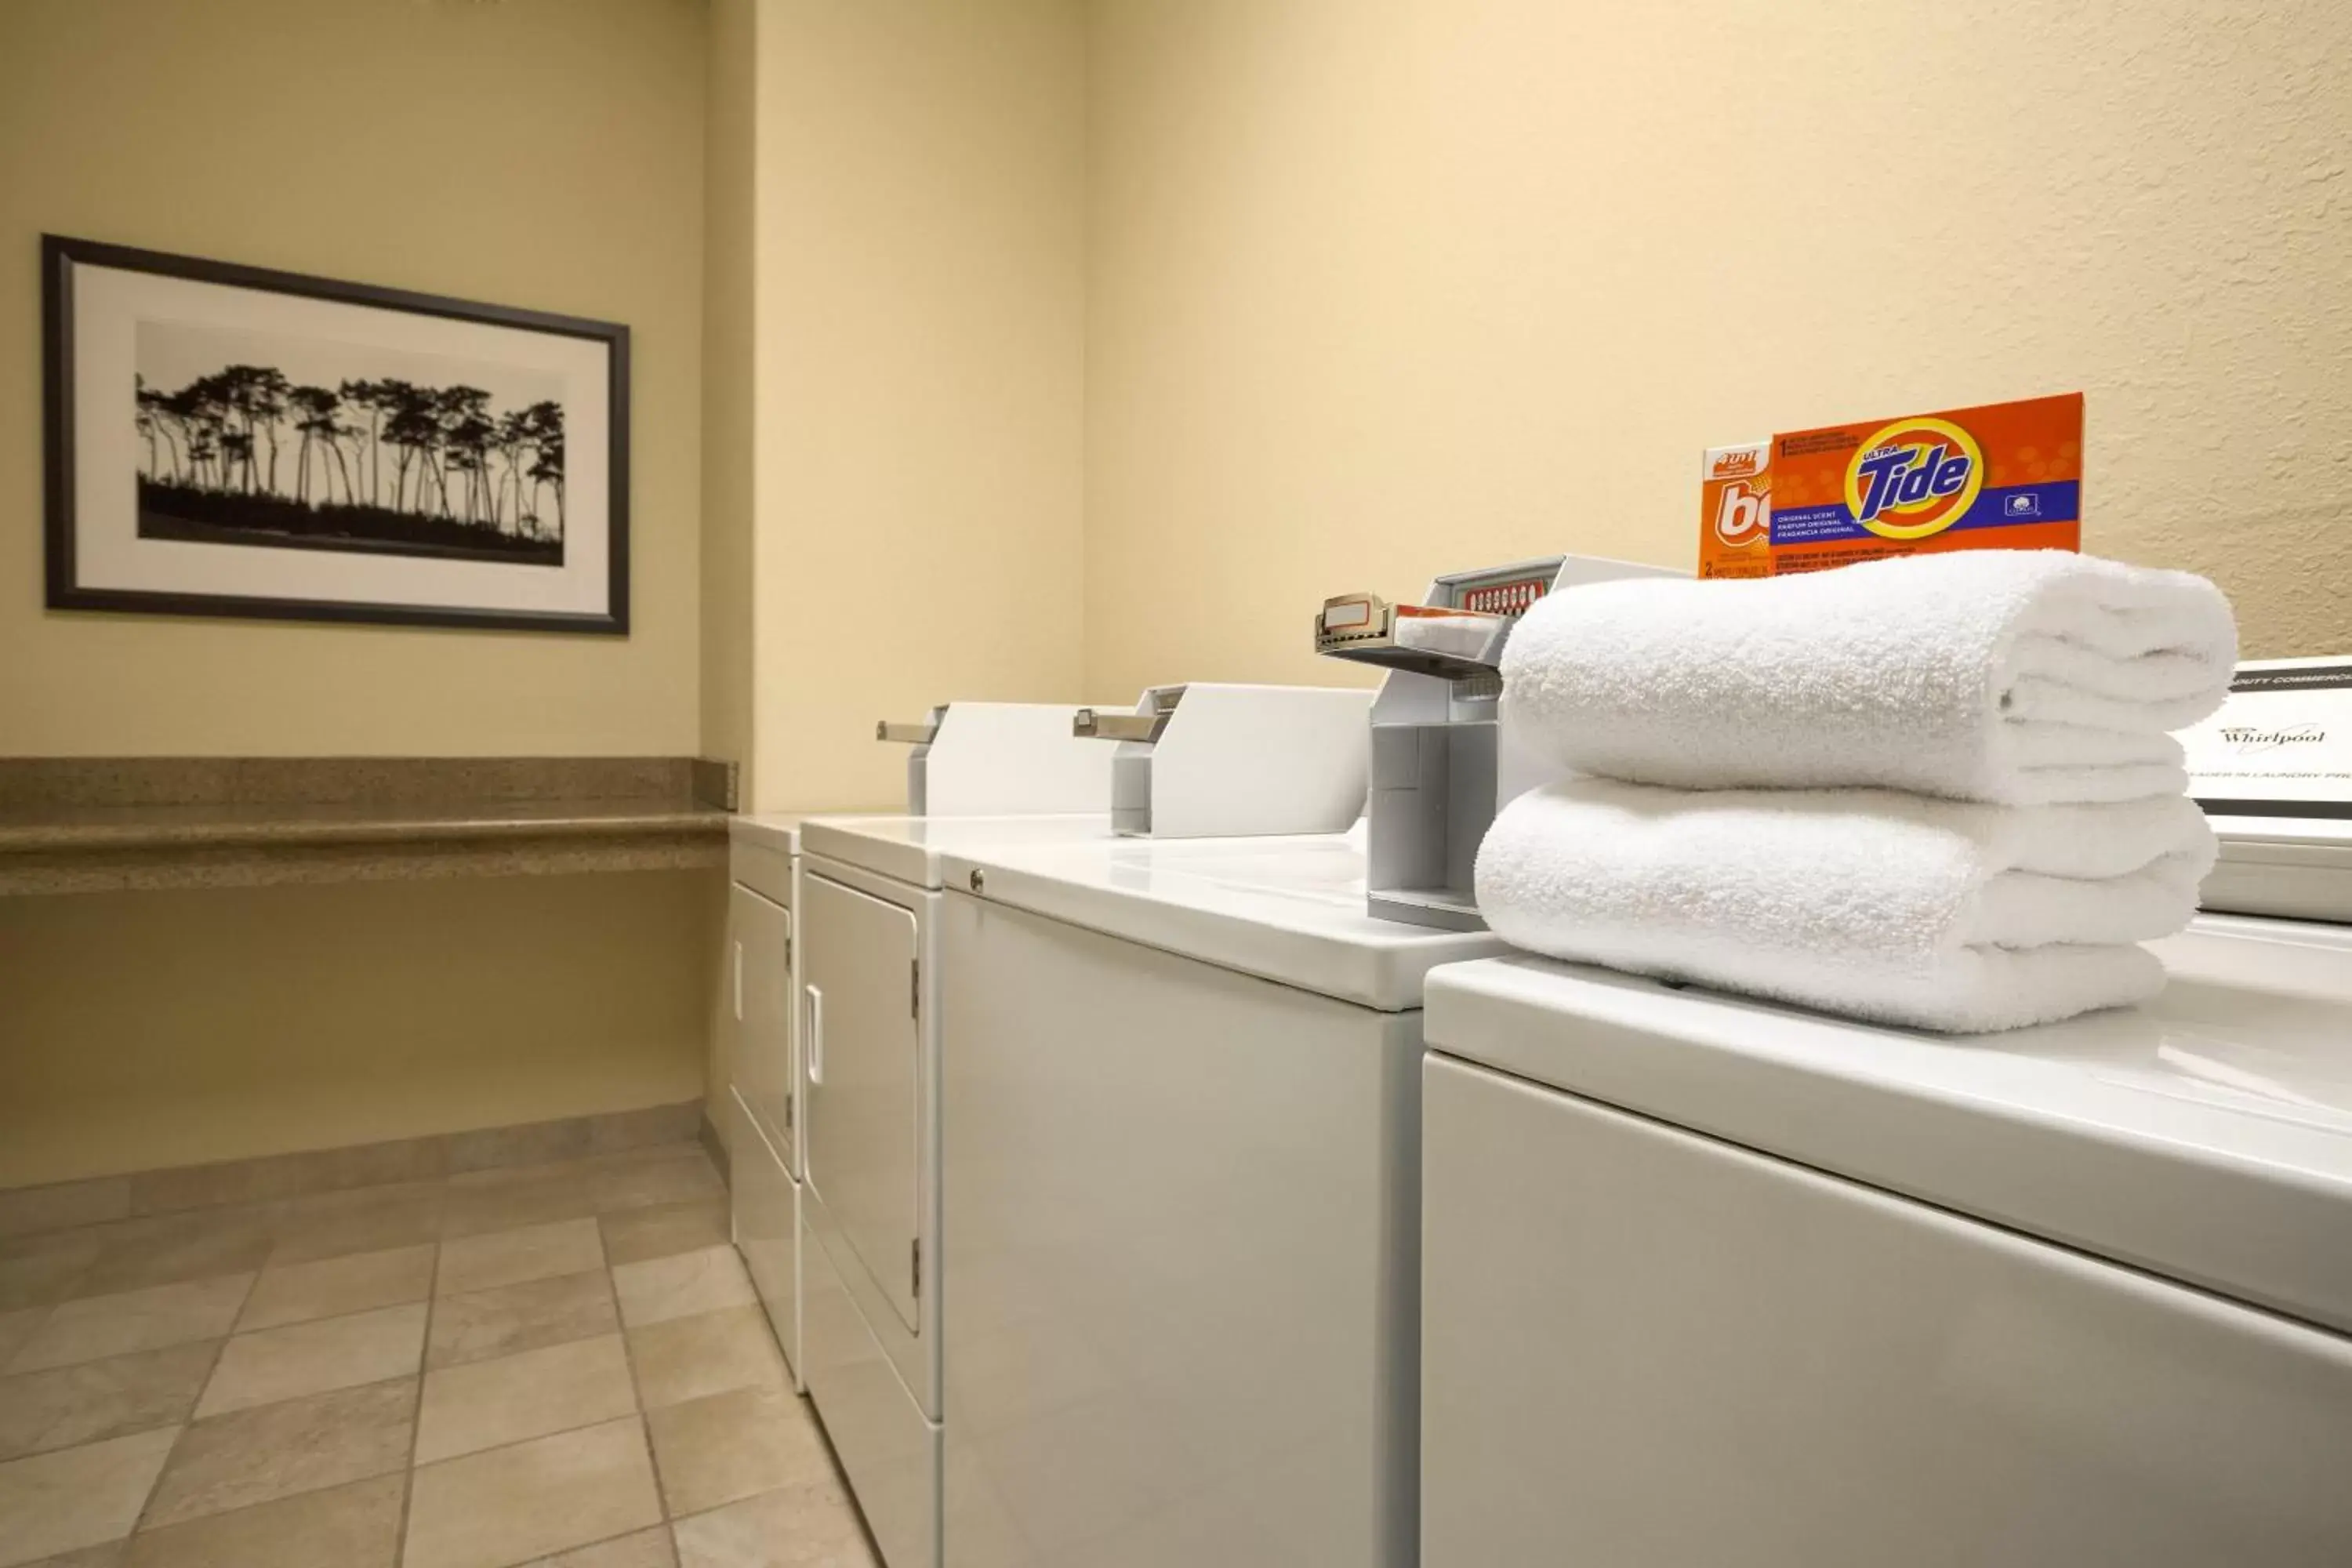 Area and facilities in Country Inn & Suites by Radisson, Tuscaloosa, AL